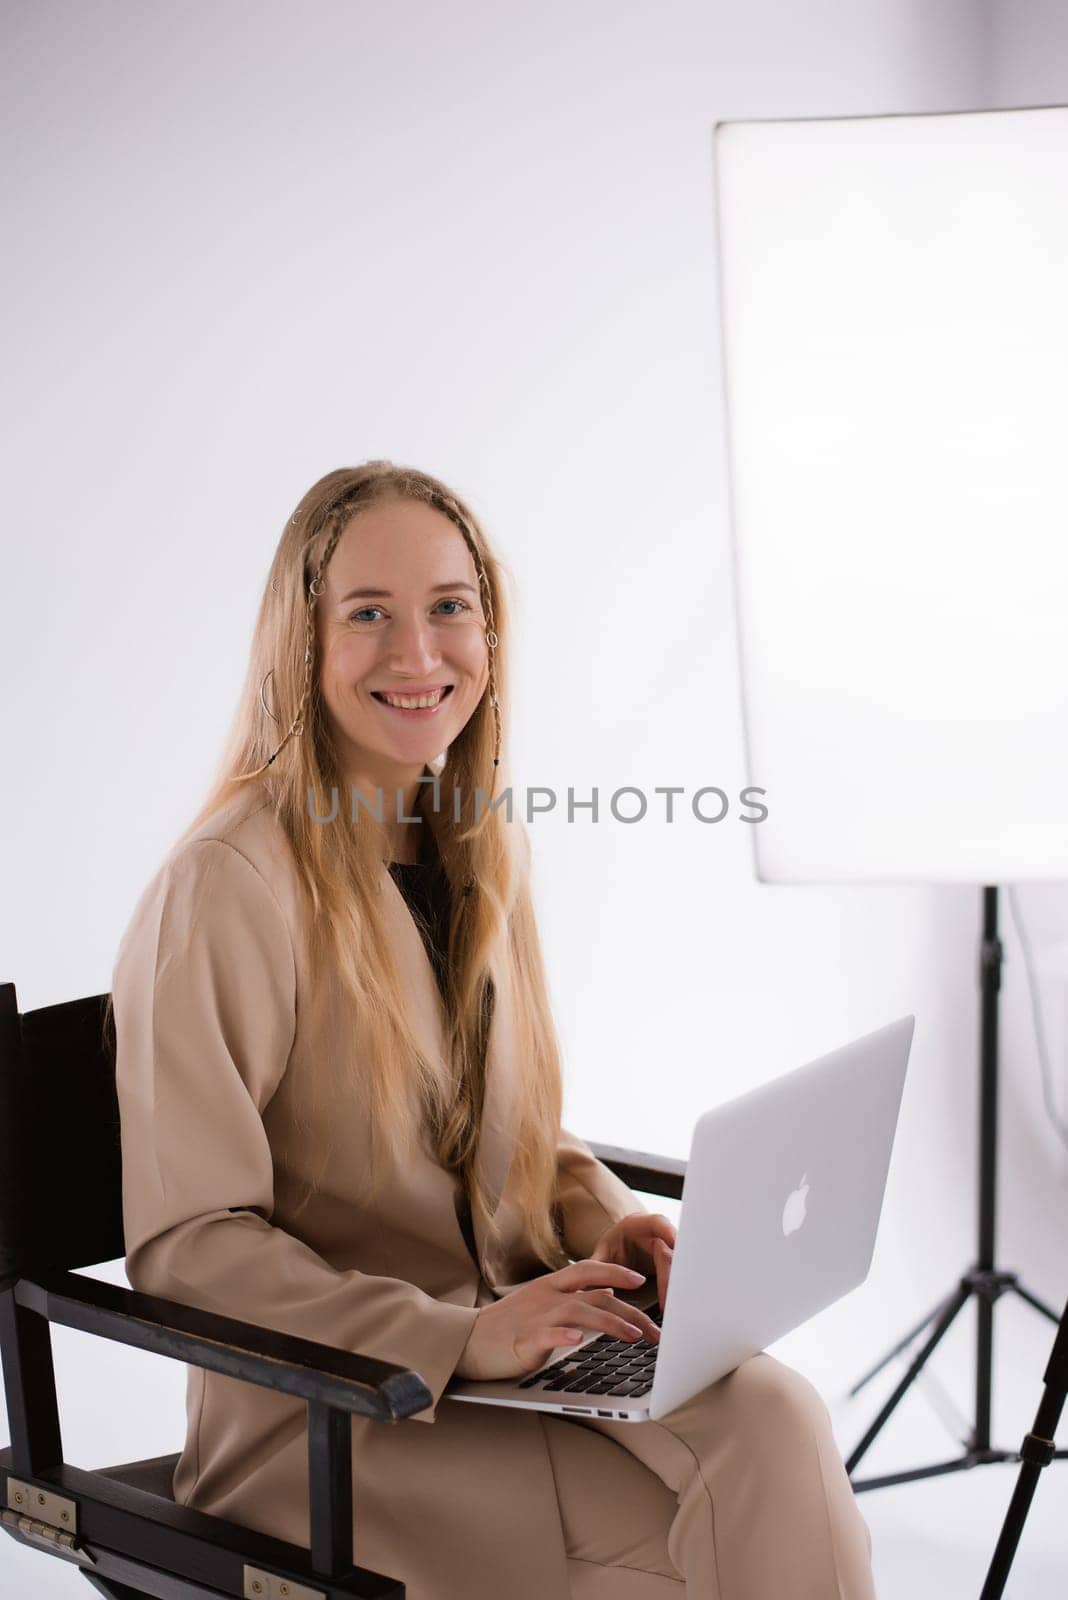 A business woman in a suit is working, typing on a laptop apple and sitting on a producer chair. portrait blonde assistant of hands with computer MacBook . Vertical